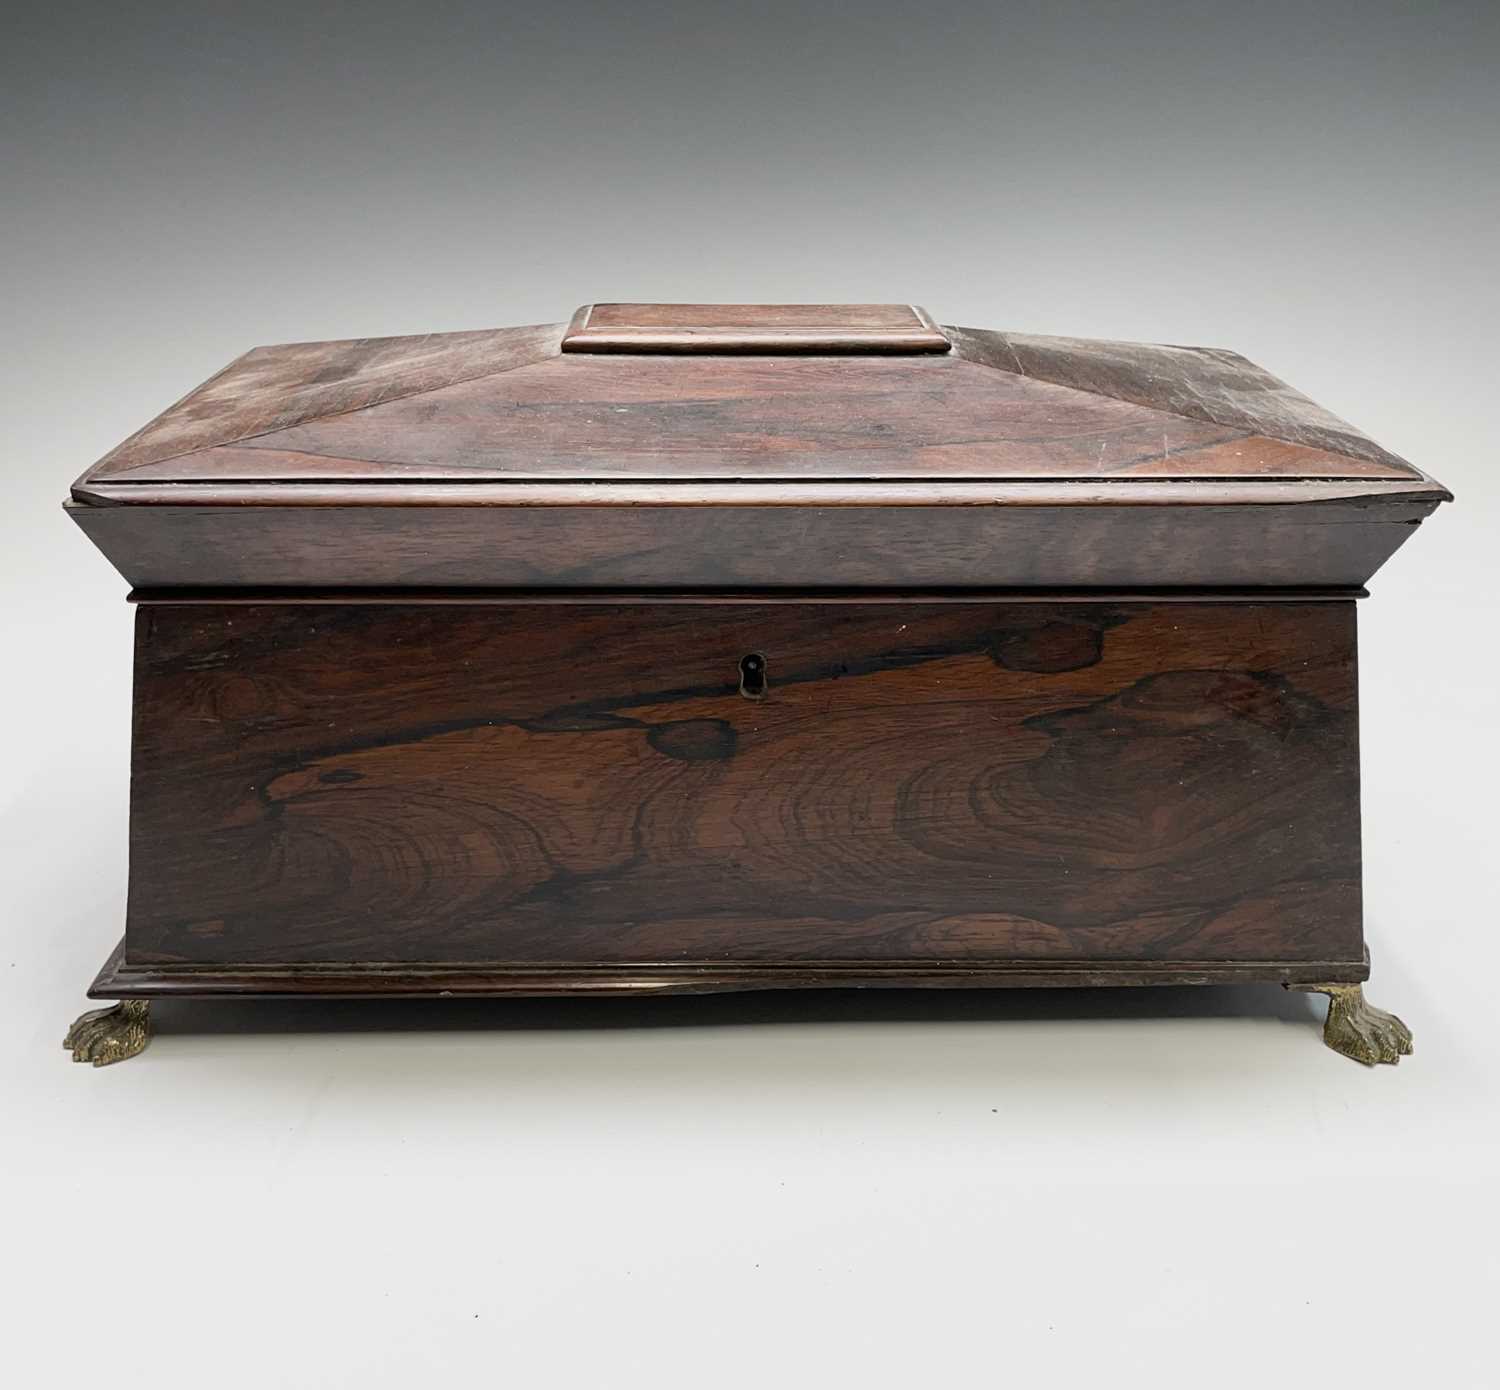 A Regency rosewood tea caddy, of sarcophagus shape, with a glass mixing bowl and two lidded - Image 7 of 9